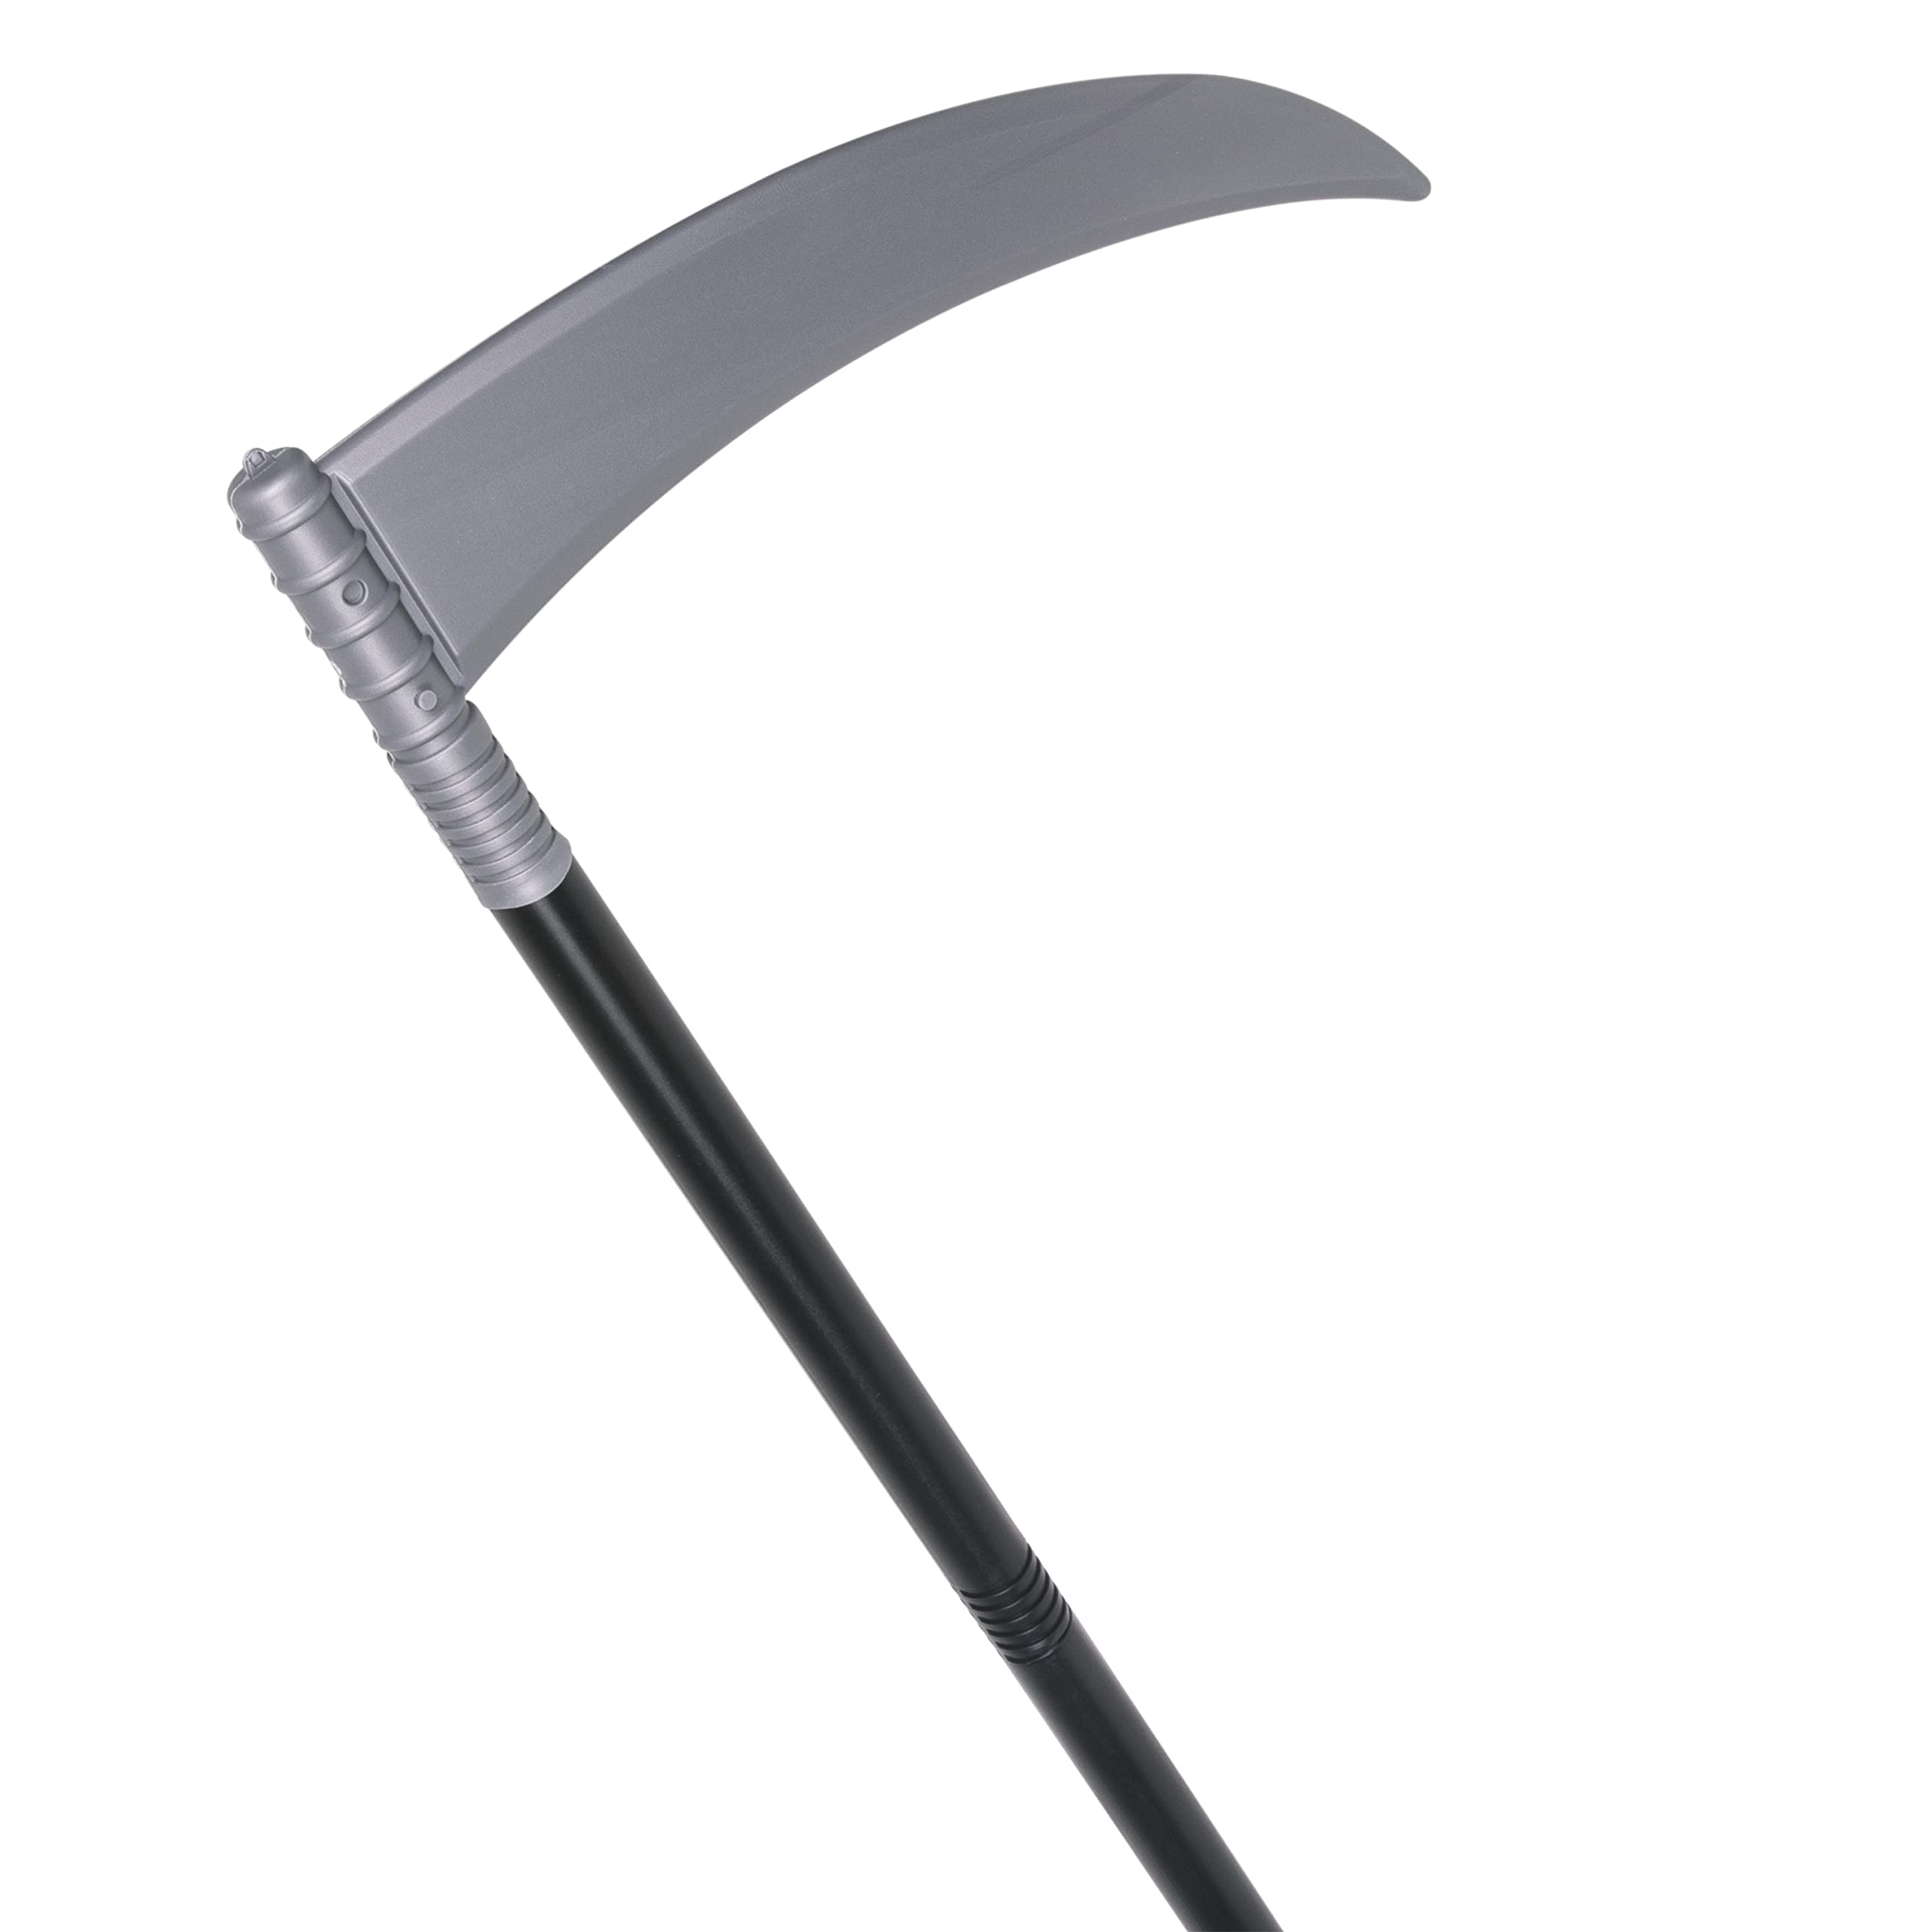 Kangaroo Grim Reaper Scythe Weapon – Scythe Prop for Halloween Parties – 40-inch Long Reaper Sickle for Kids and Adults – Grim Reaper Costume Accessory – Scythe Weapon with Plastic Sickle Prop